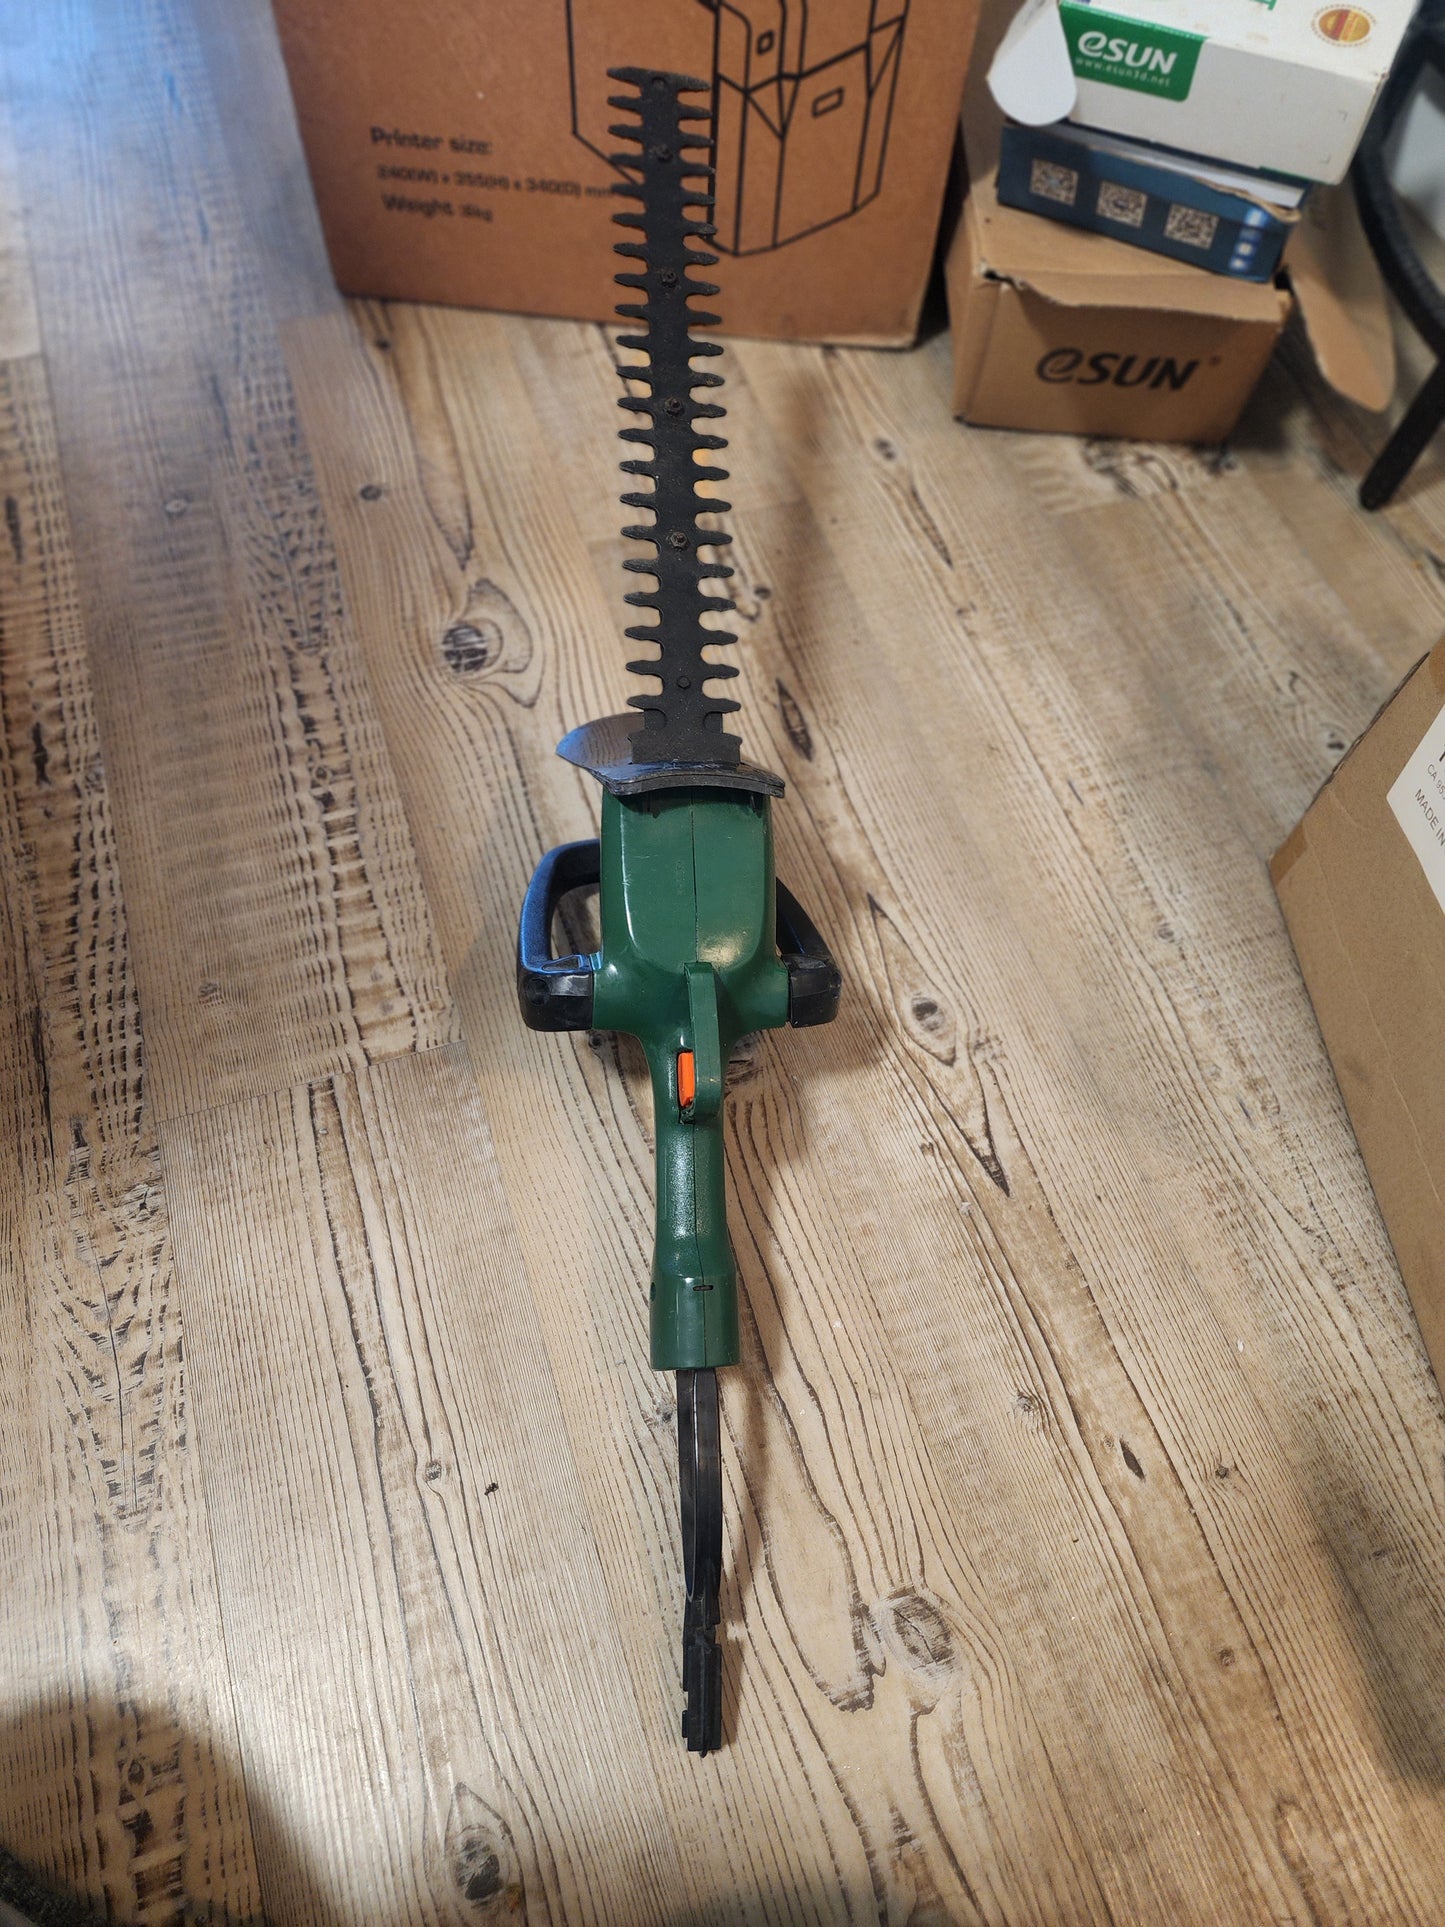 Black and Decker Hedge Trimmer pre-owned